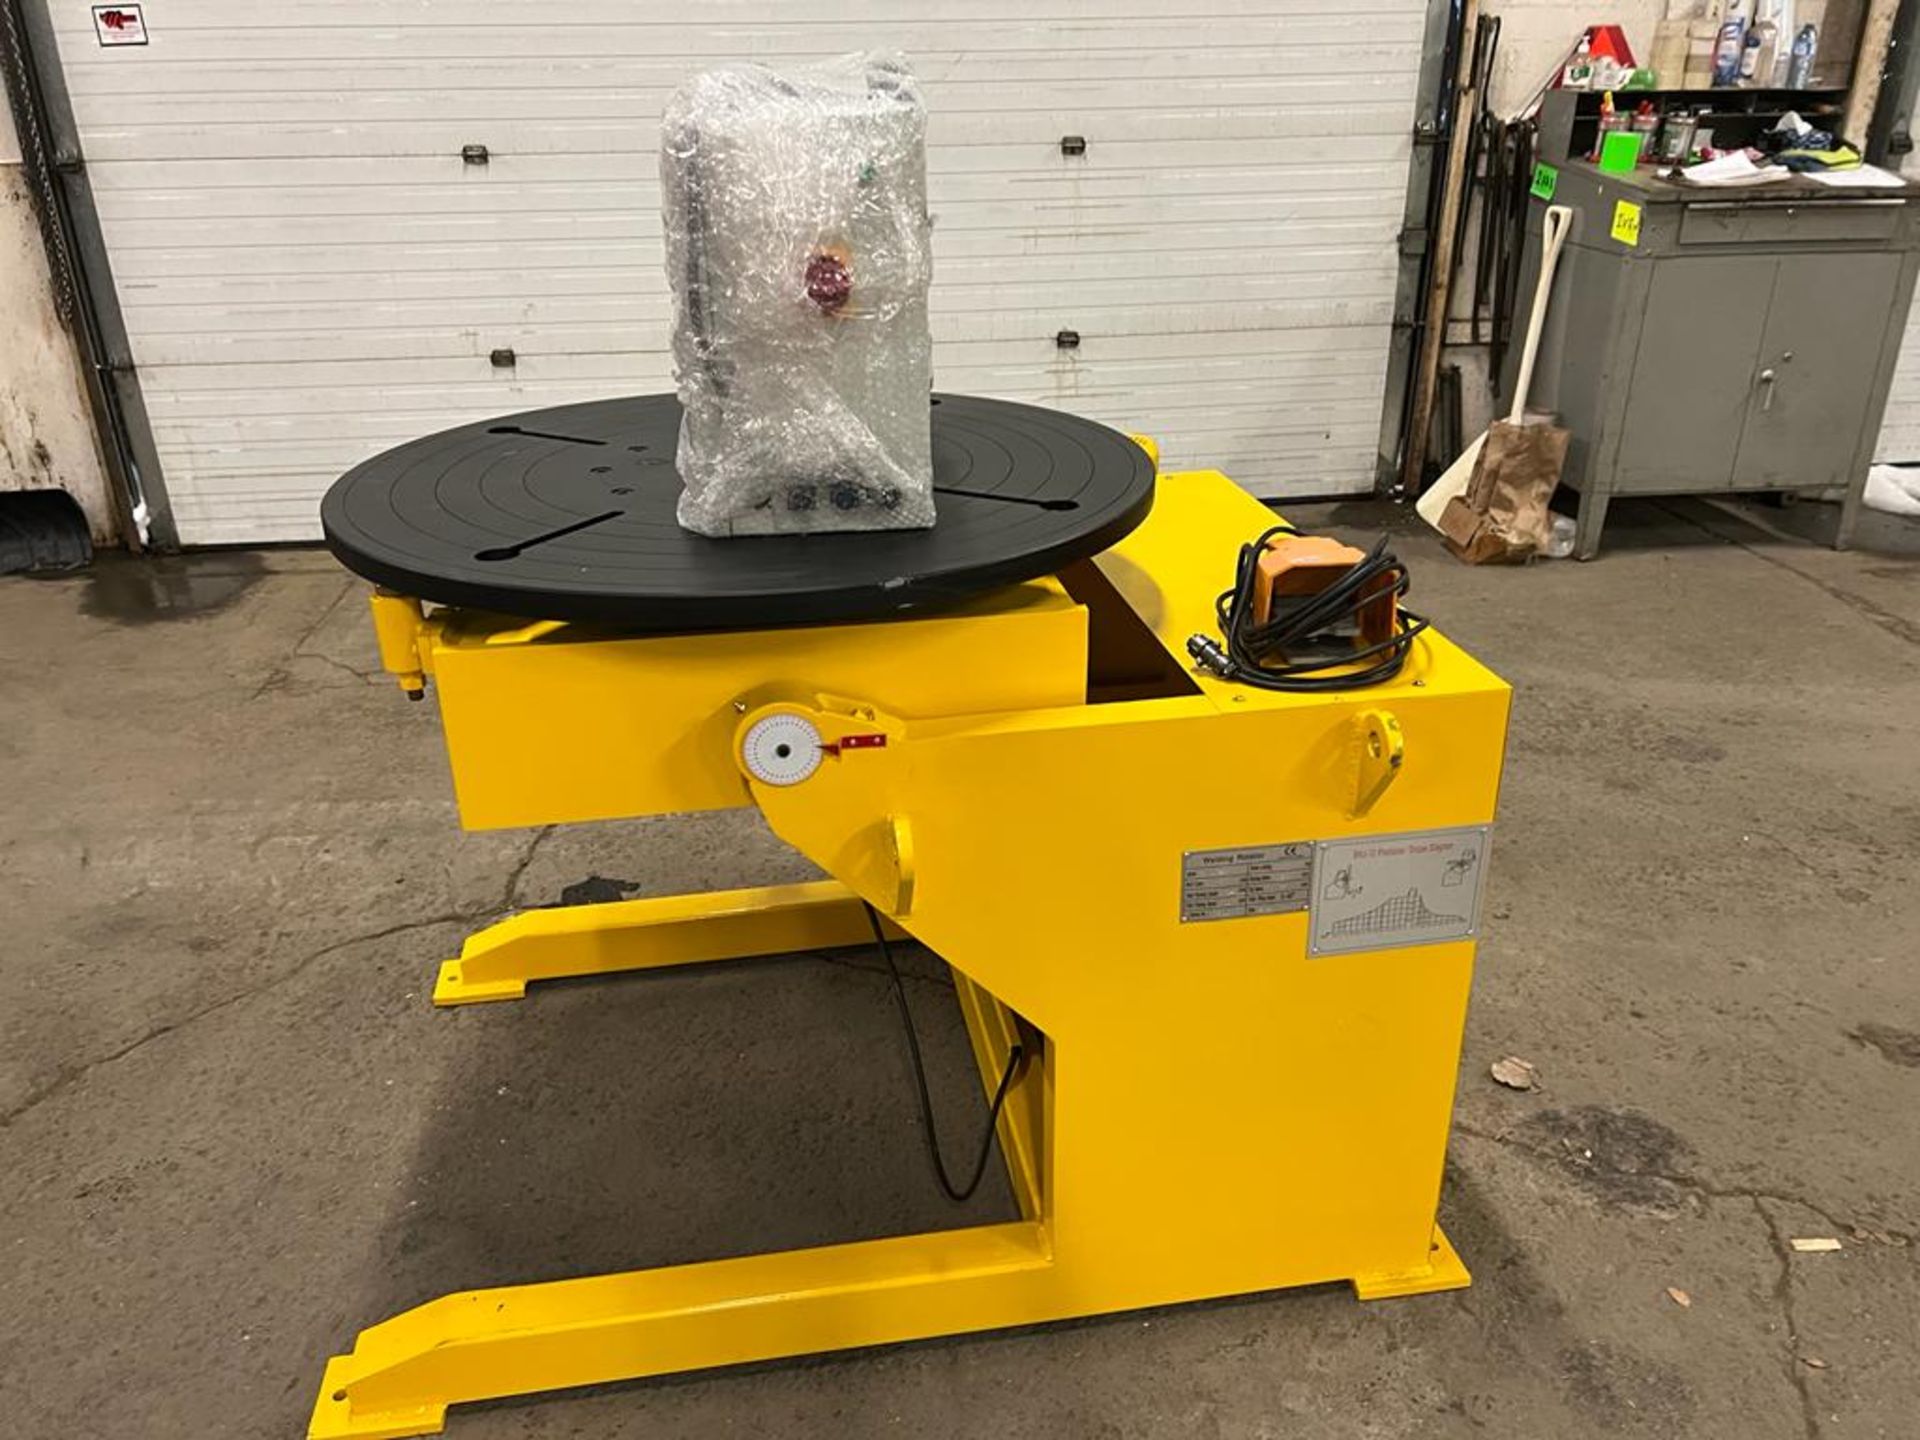 BWJ-10 WELDING POSITIONER 2200lbs 1000kg capacity - tilt and rotate with variable speed drive